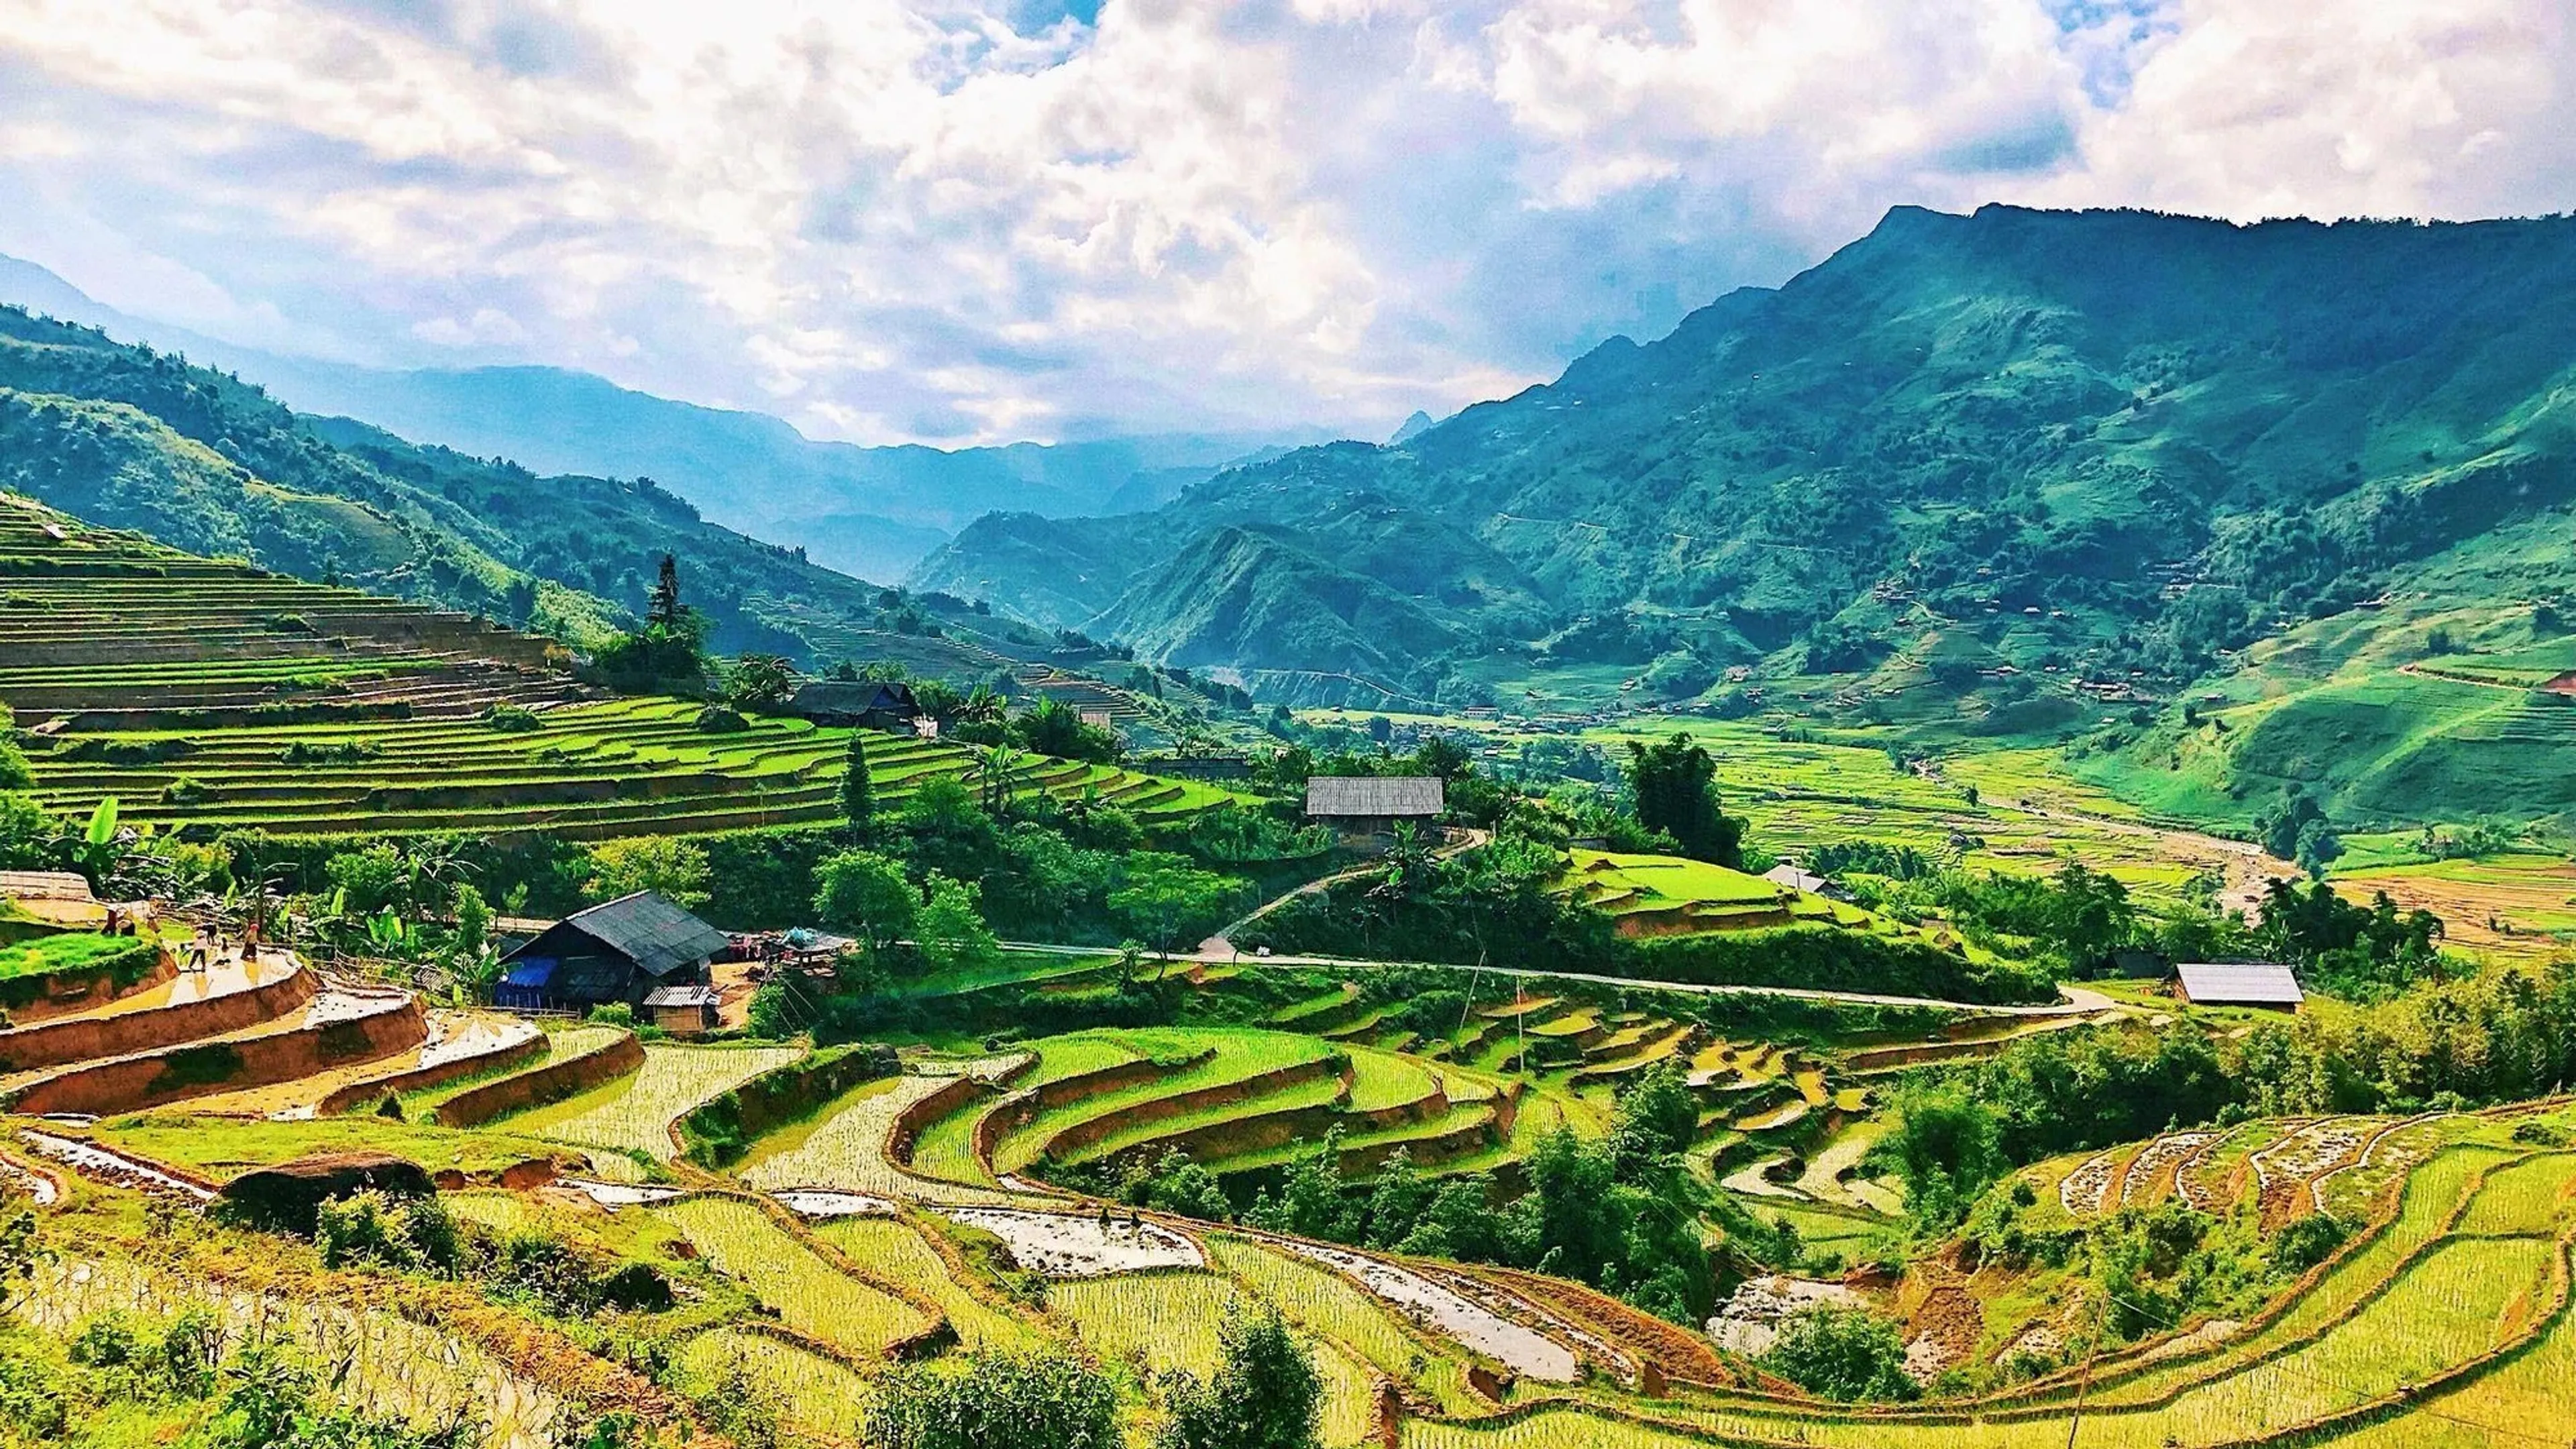 Experience traveling to Sapa on your own